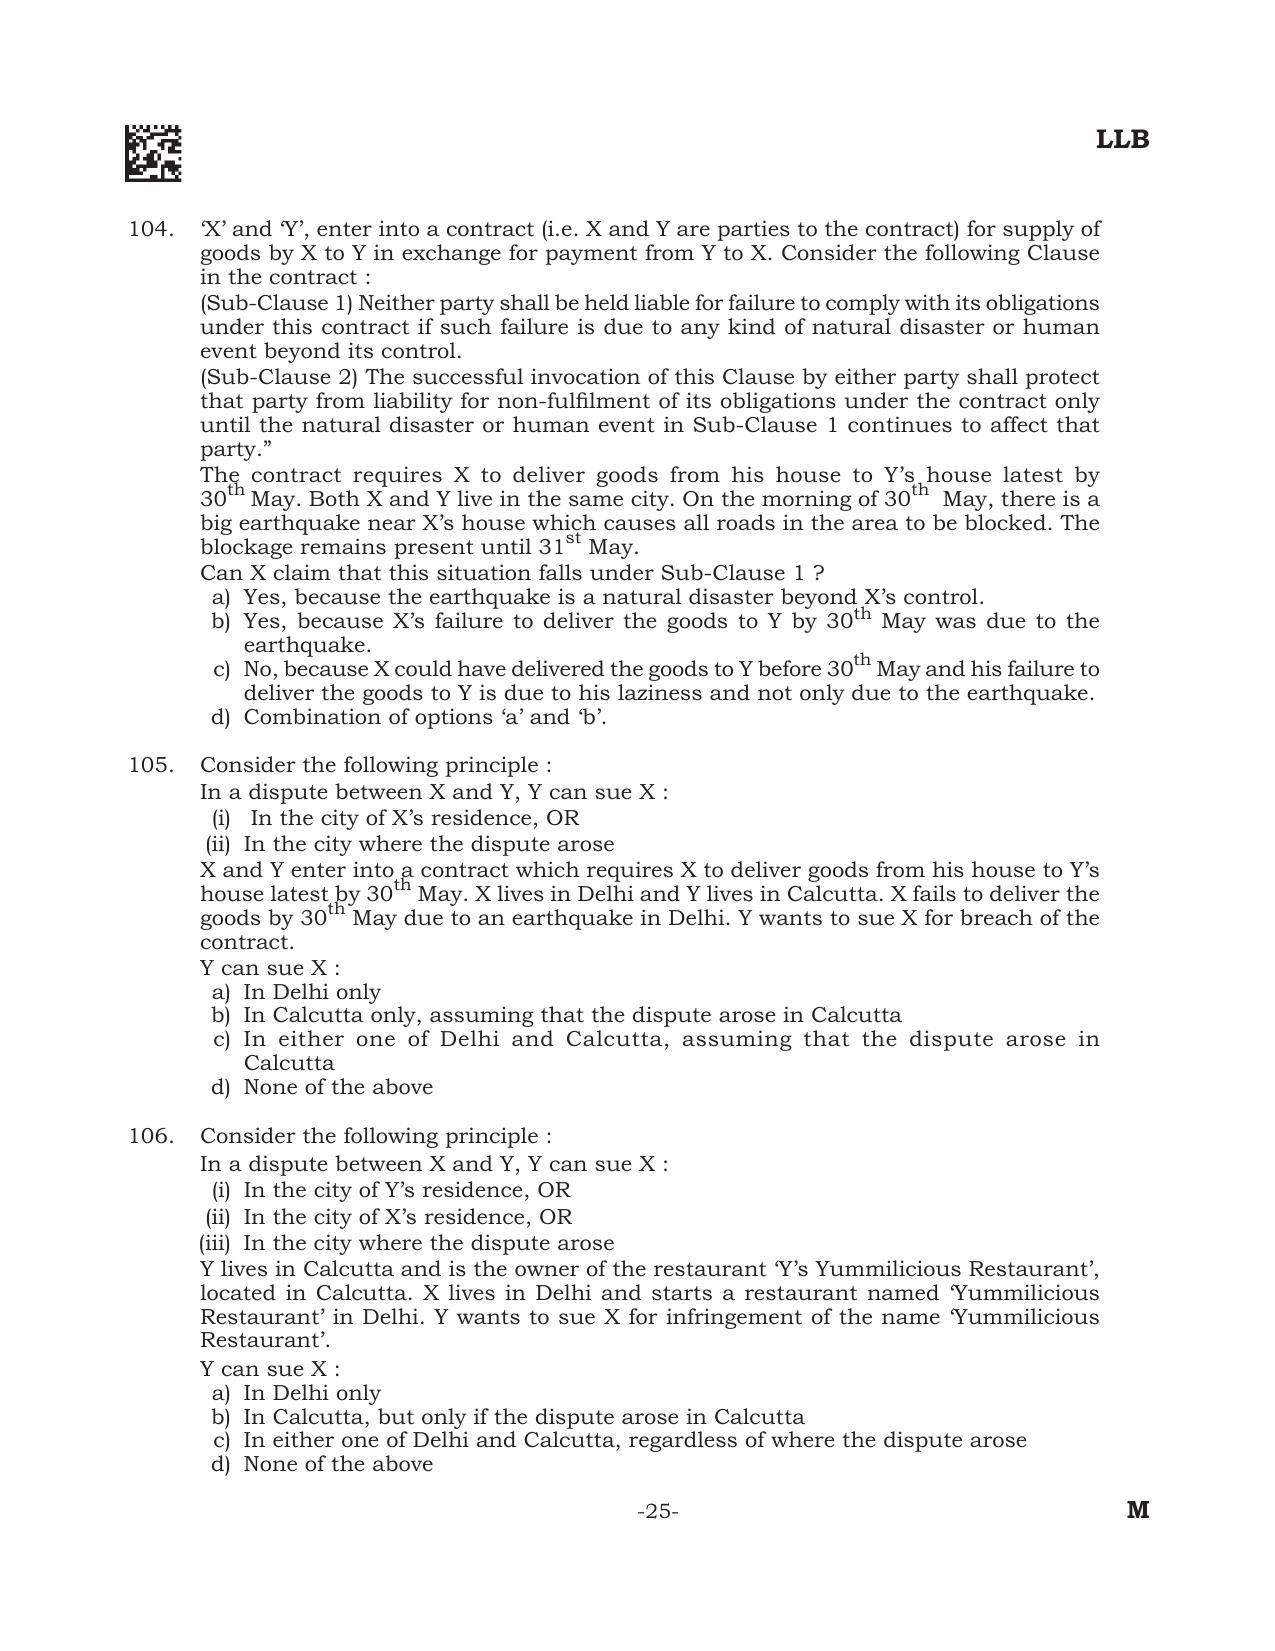 AILET 2022 Question Paper for BA LLB - Page 25